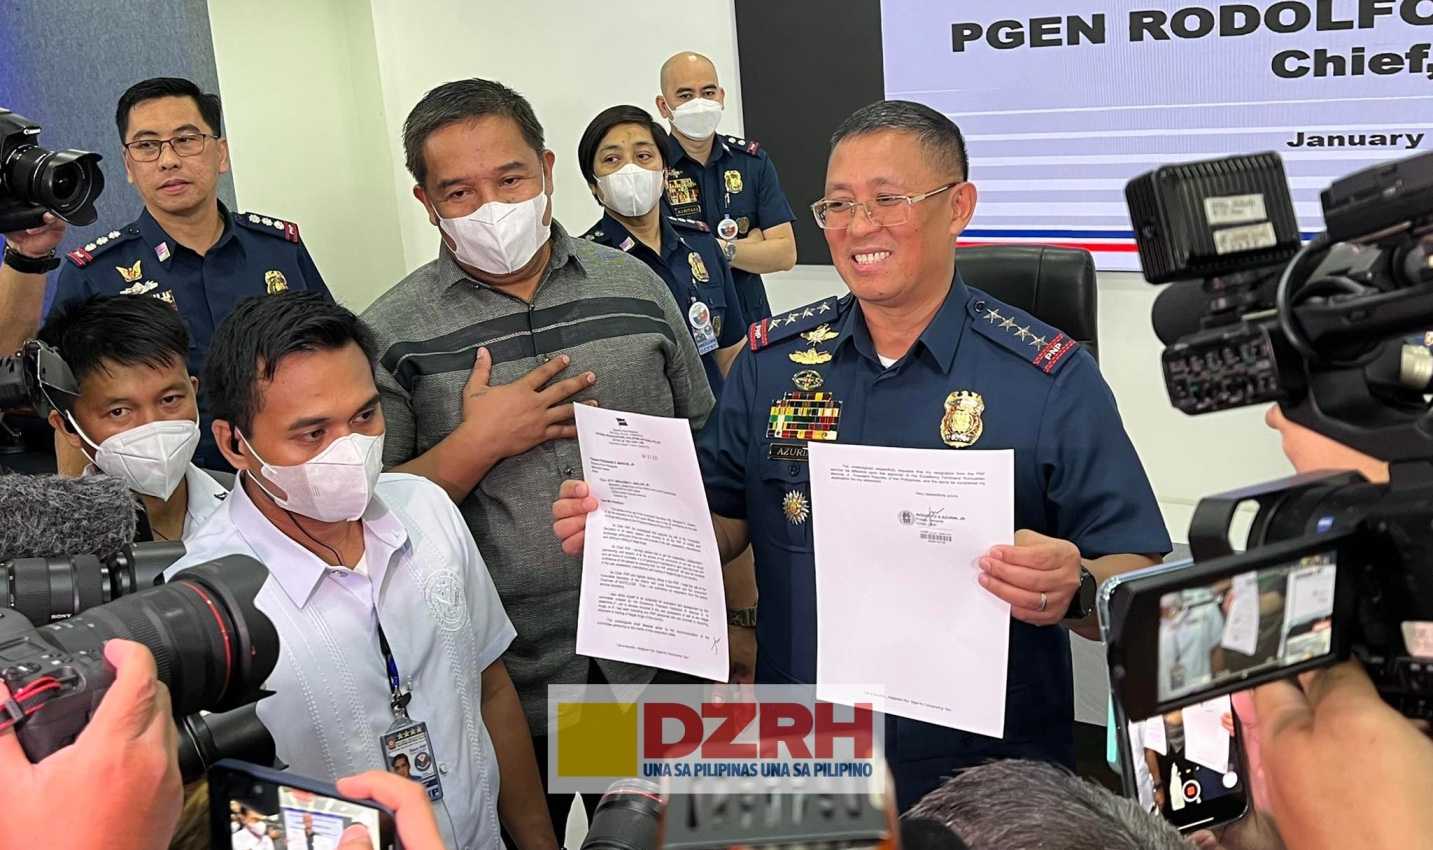 PNP chief Azurin heeds to DILG's calls, submits courtesy resignation